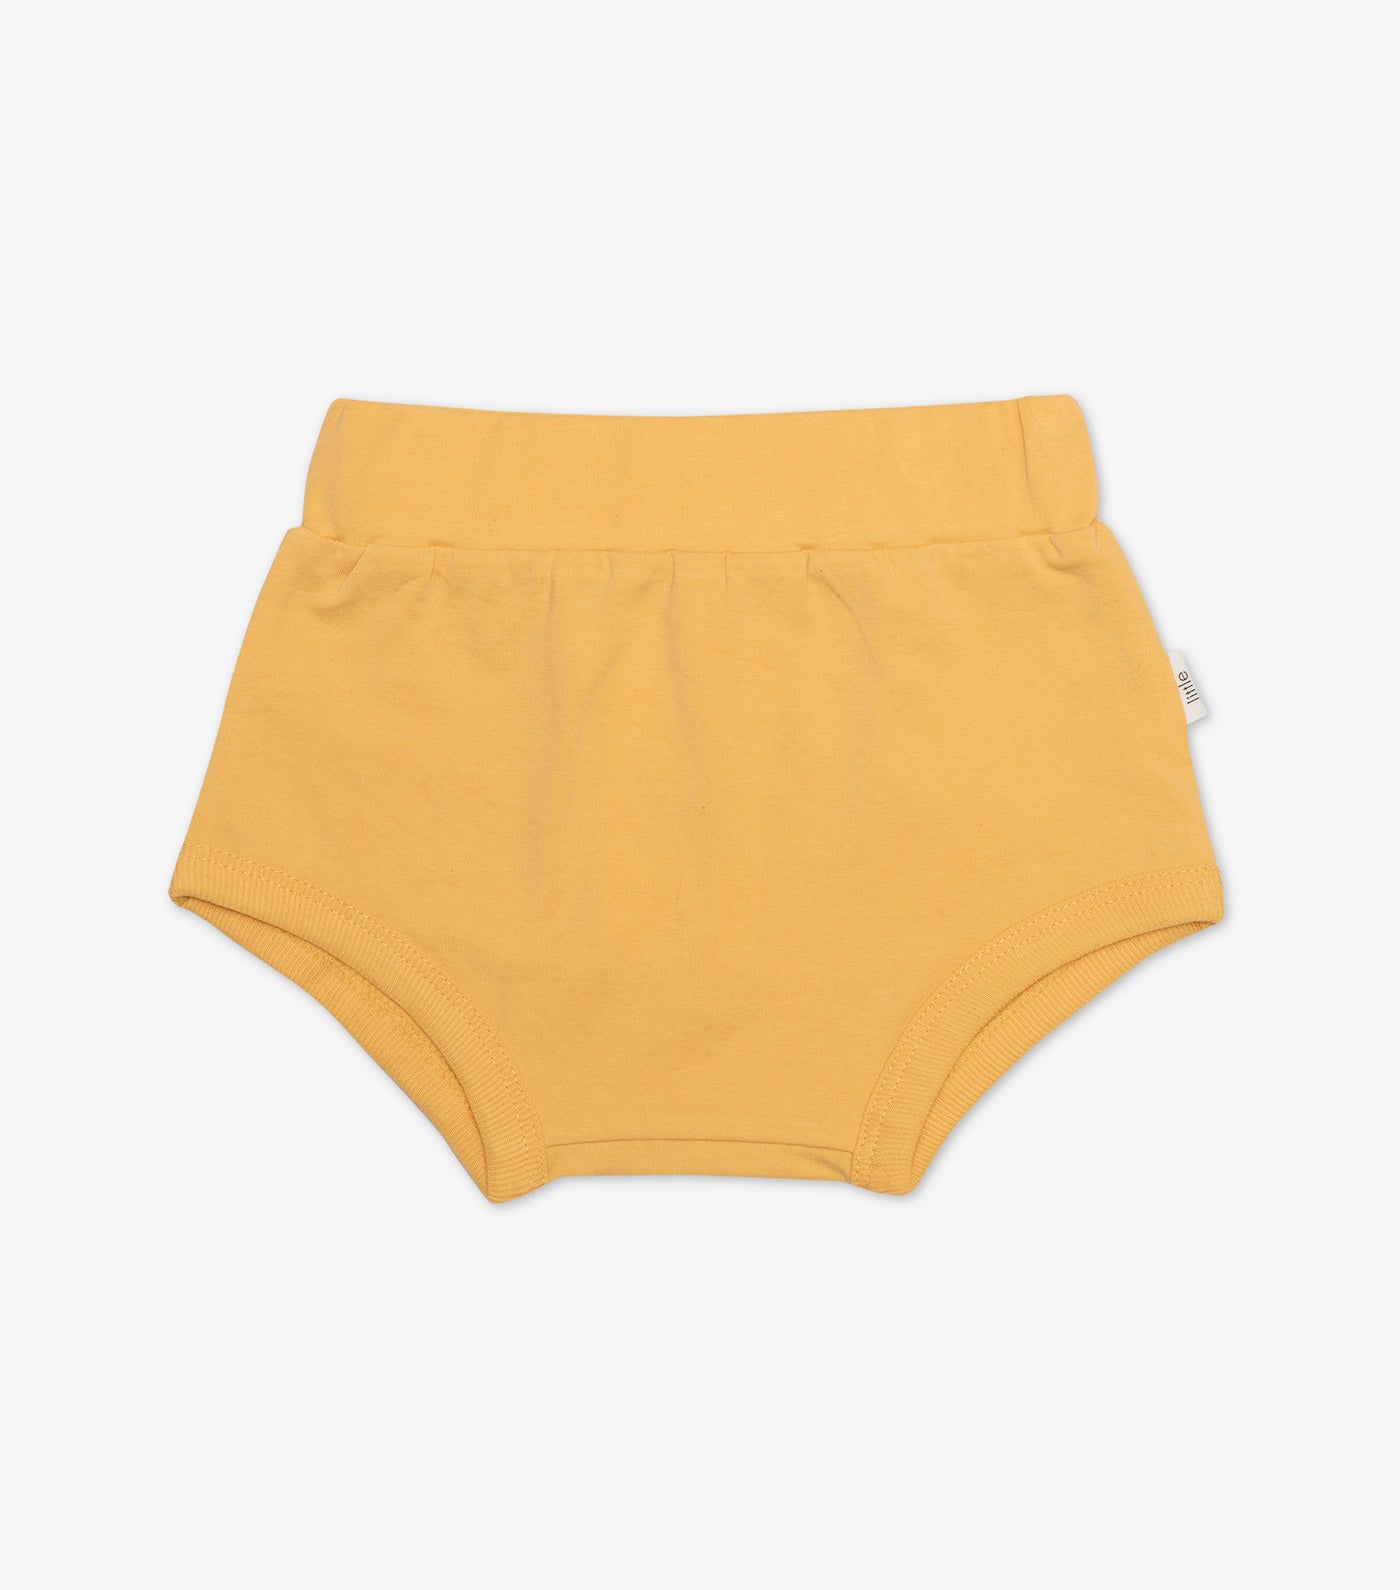 3 Pack of Baby Bloomers